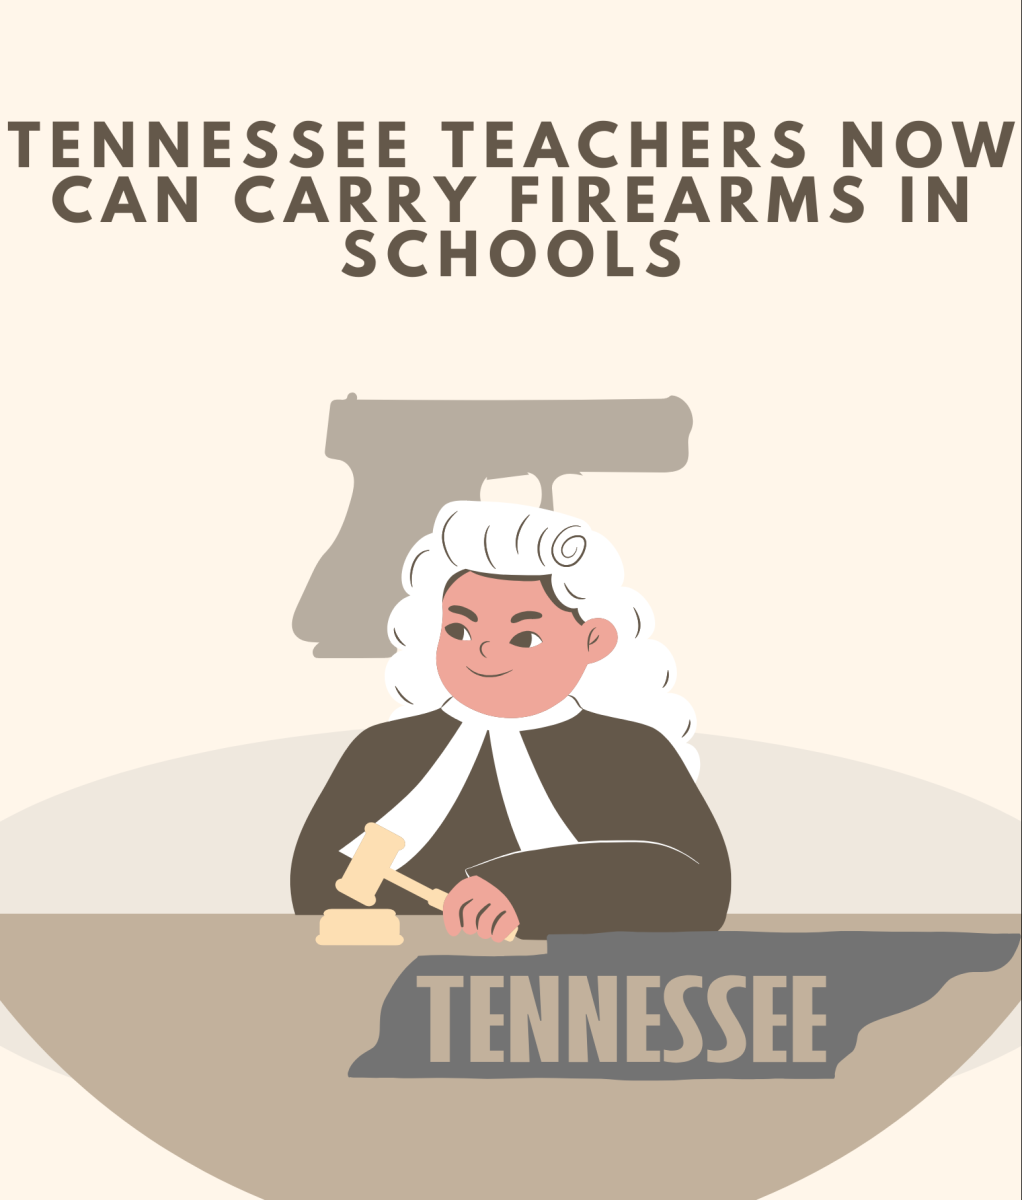 HB 1202 passes and permits Tennessee teachers to now carry firearms in schools